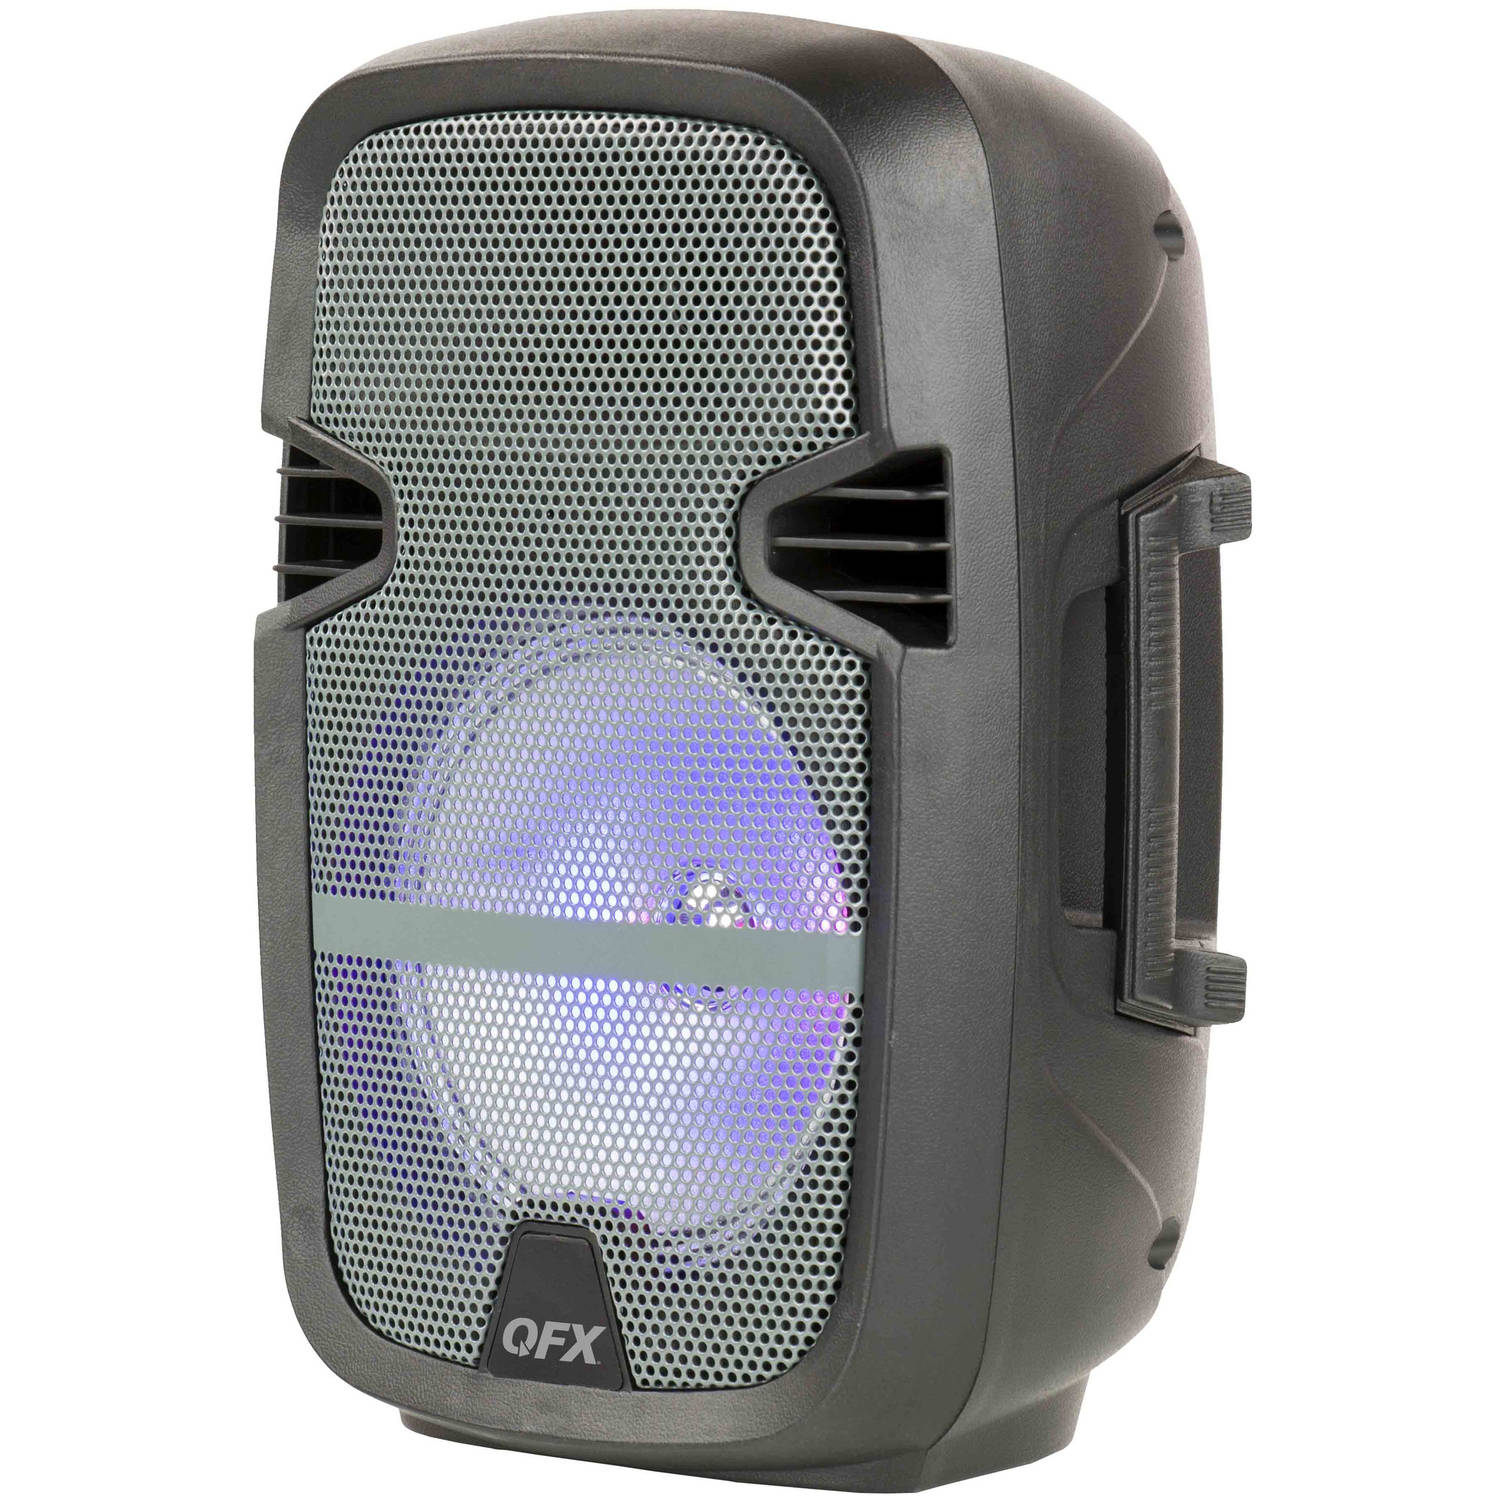 QFX PBX-61083 8" Rechargable Portable PARTY Bluetooth Speaker, Silver - image 1 of 1